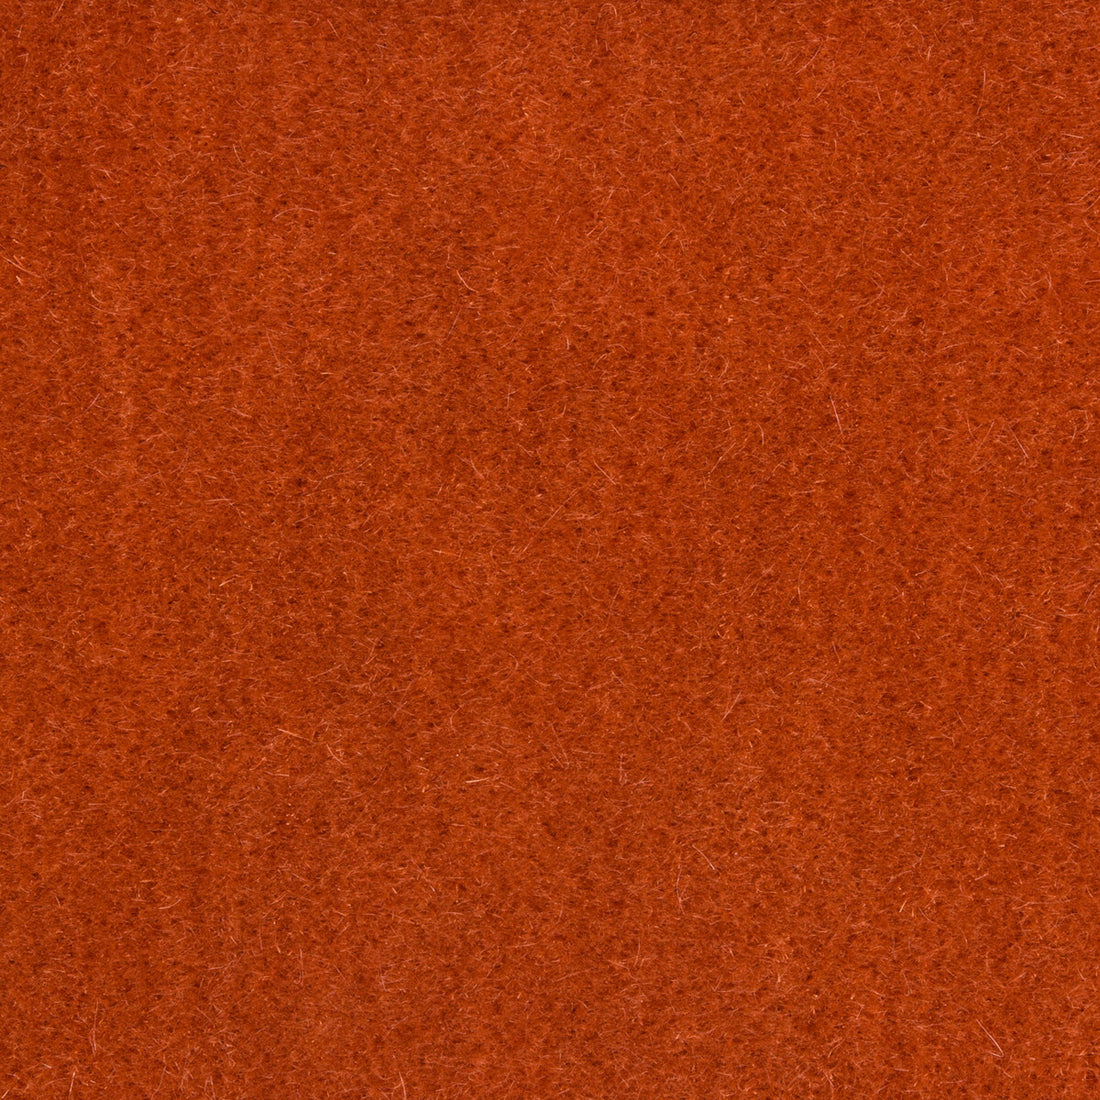 Bachelor Mohair fabric in persimmon color - pattern 8014101.24.0 - by Brunschwig &amp; Fils